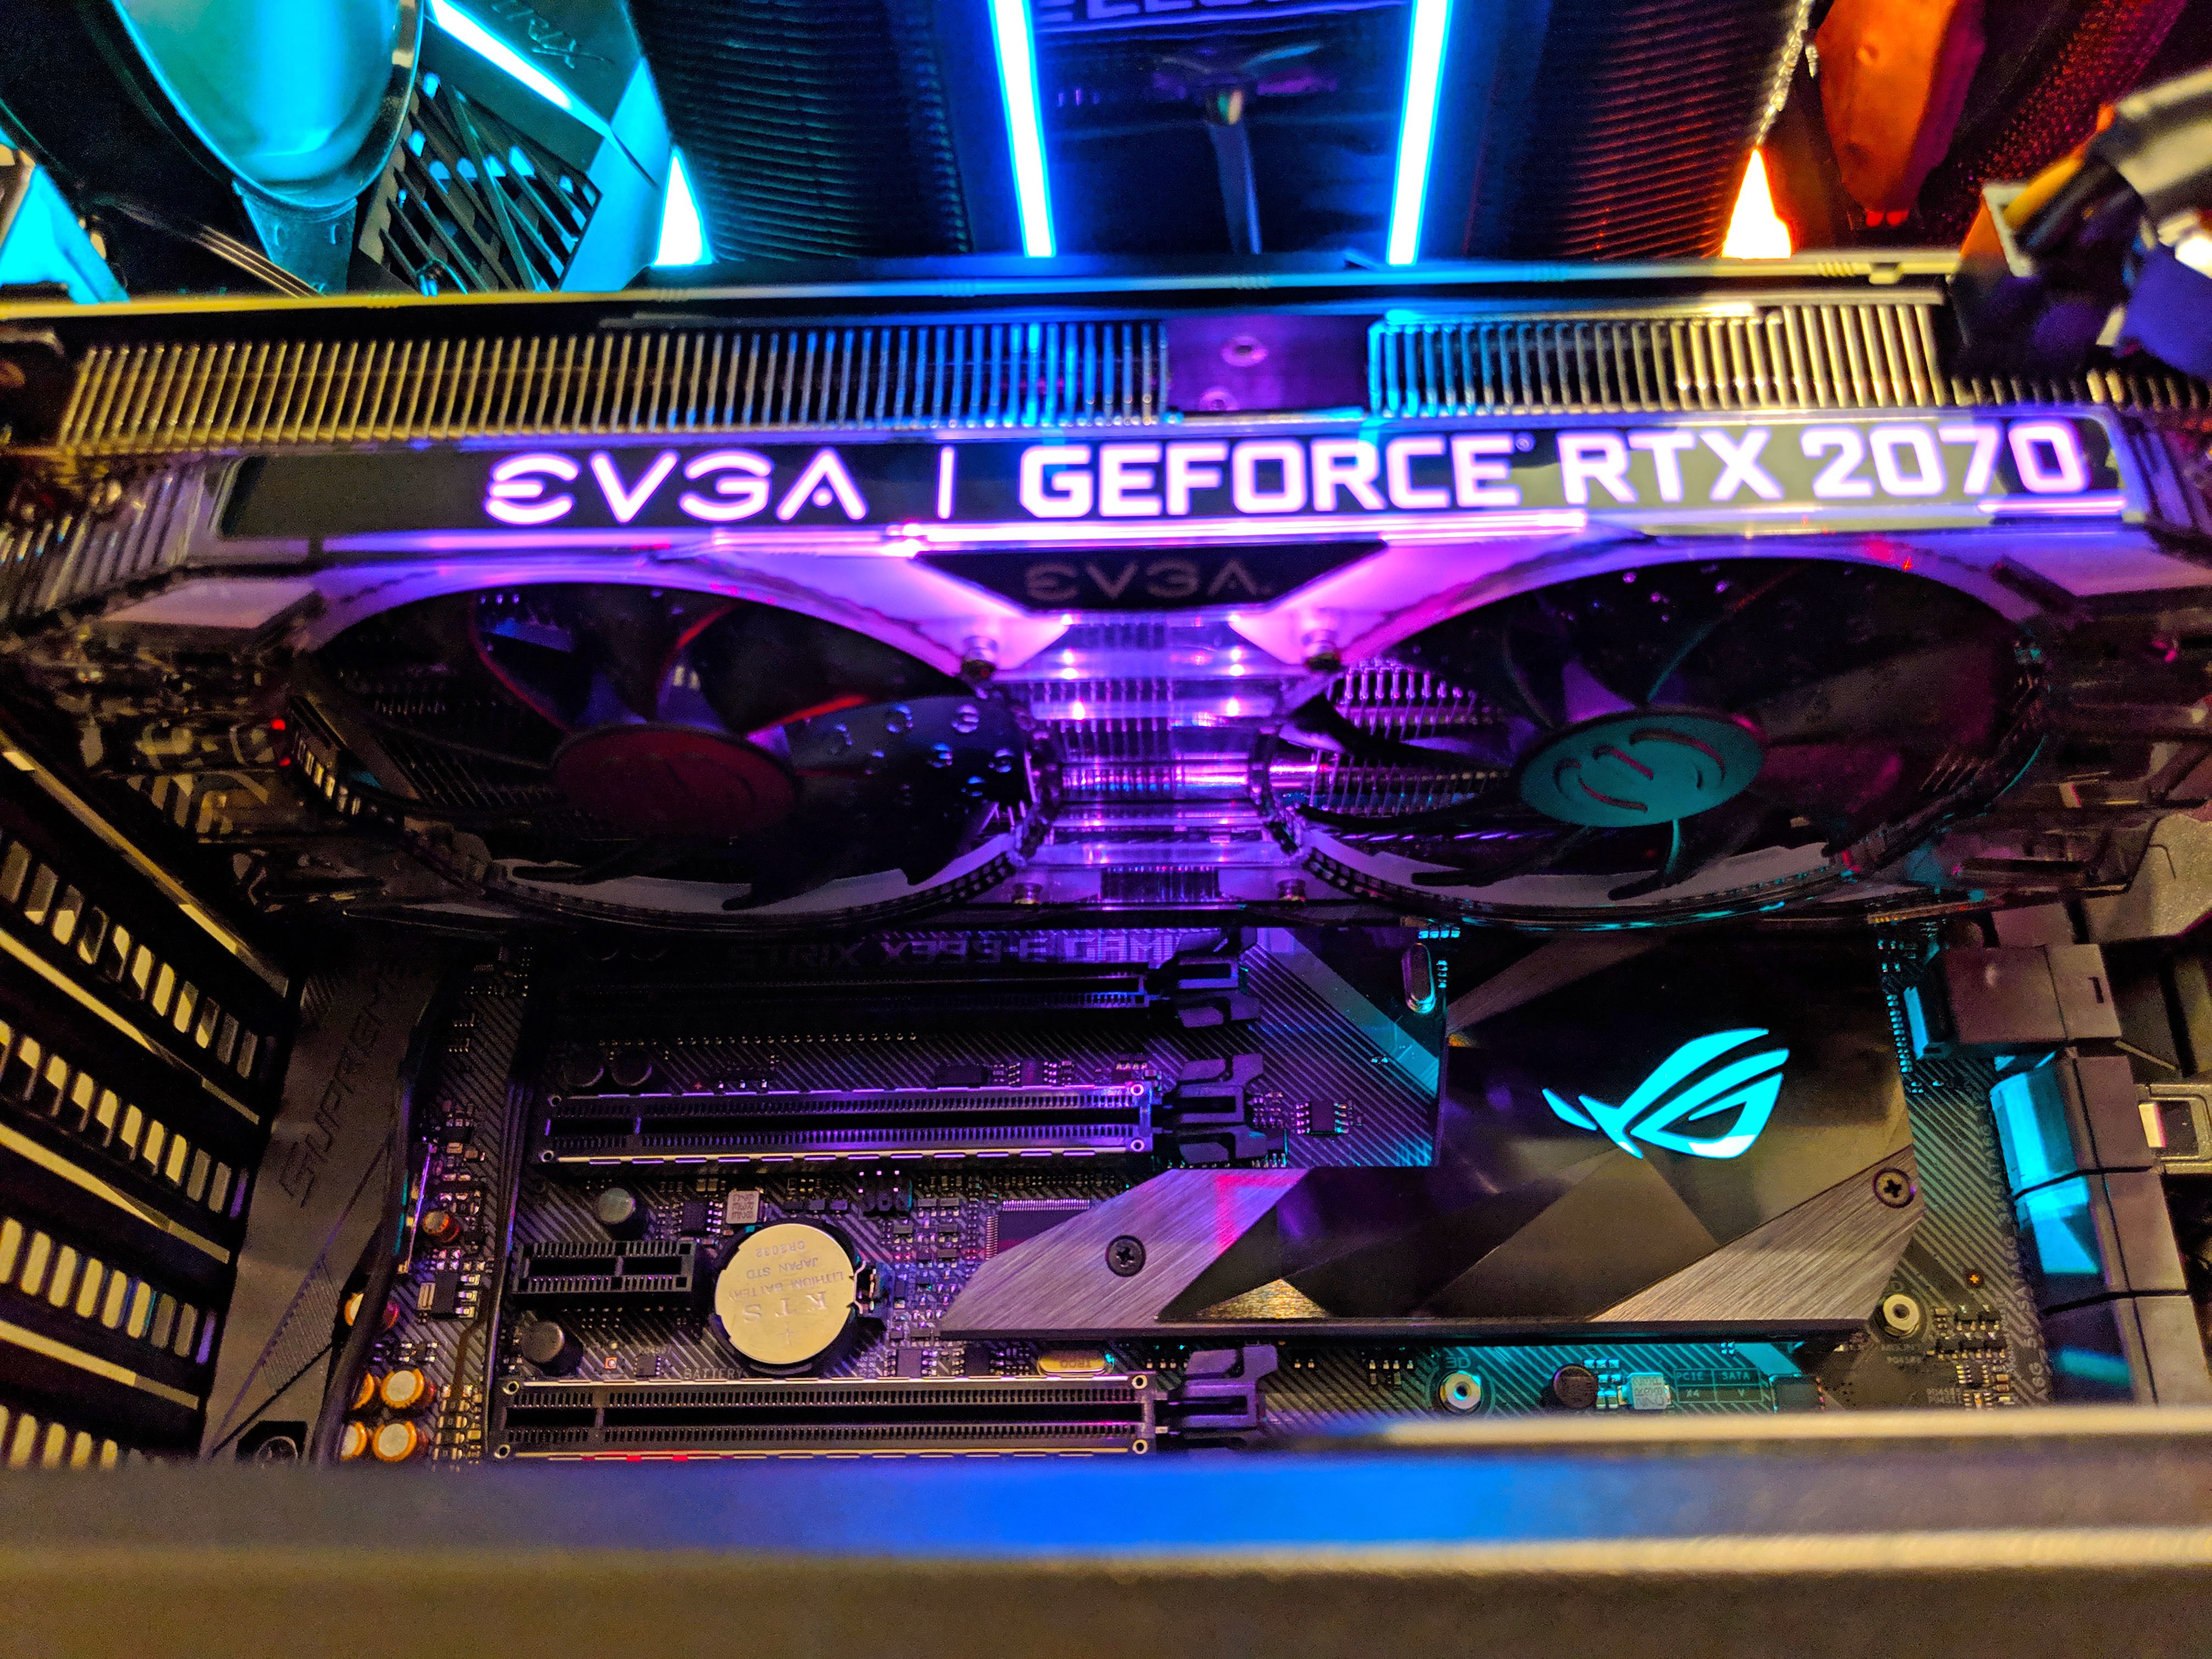 Enter a World of Unbeatable Performance with EVGA GeForce RTX 2070